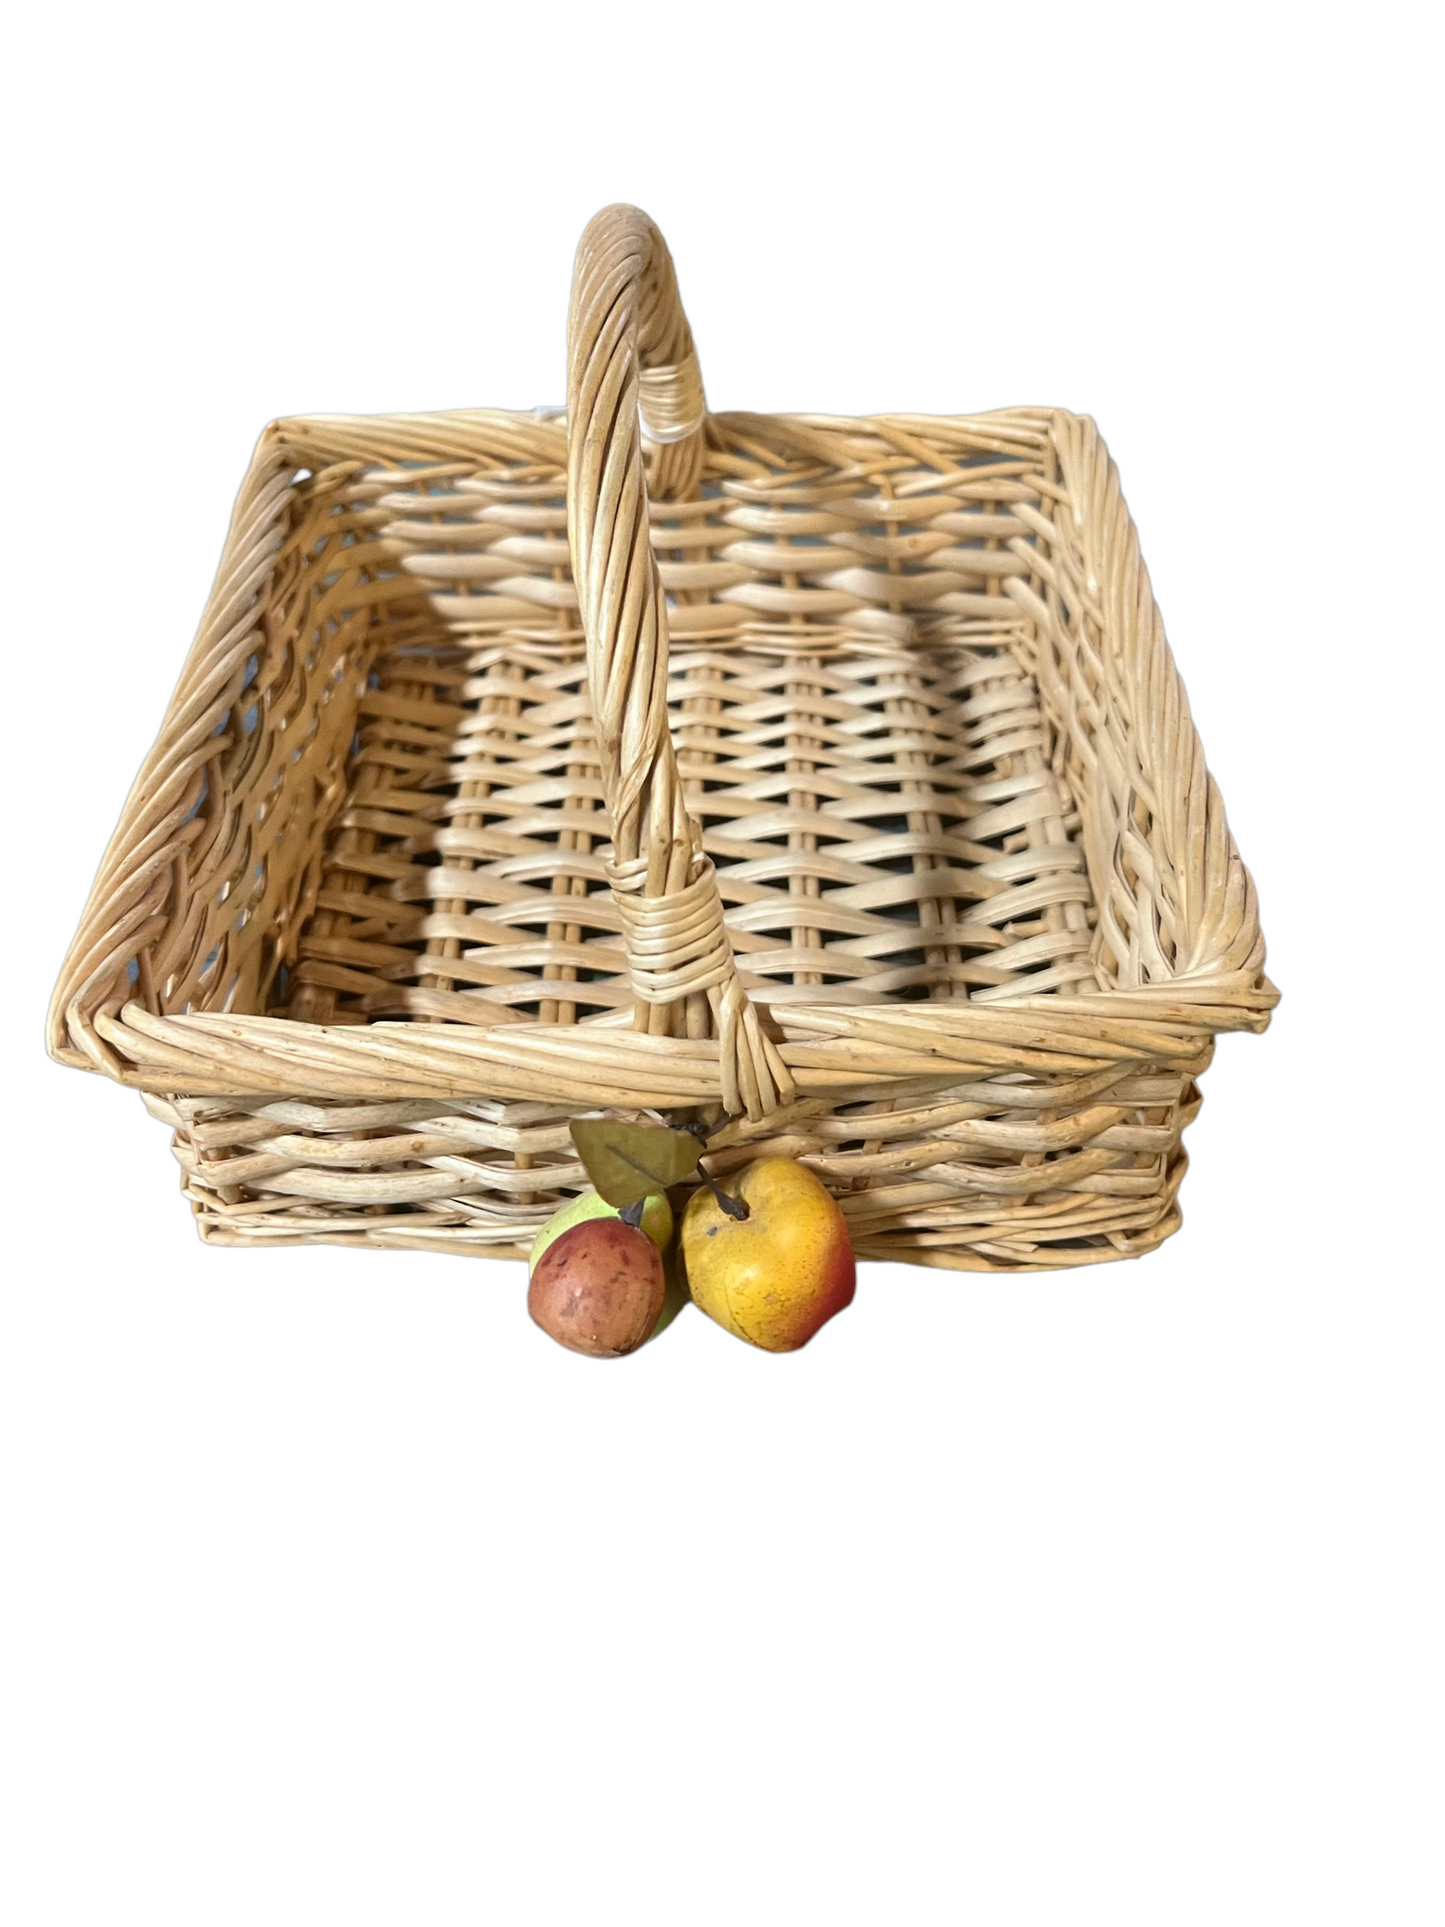 Woven Wicker Basket with fruit decor